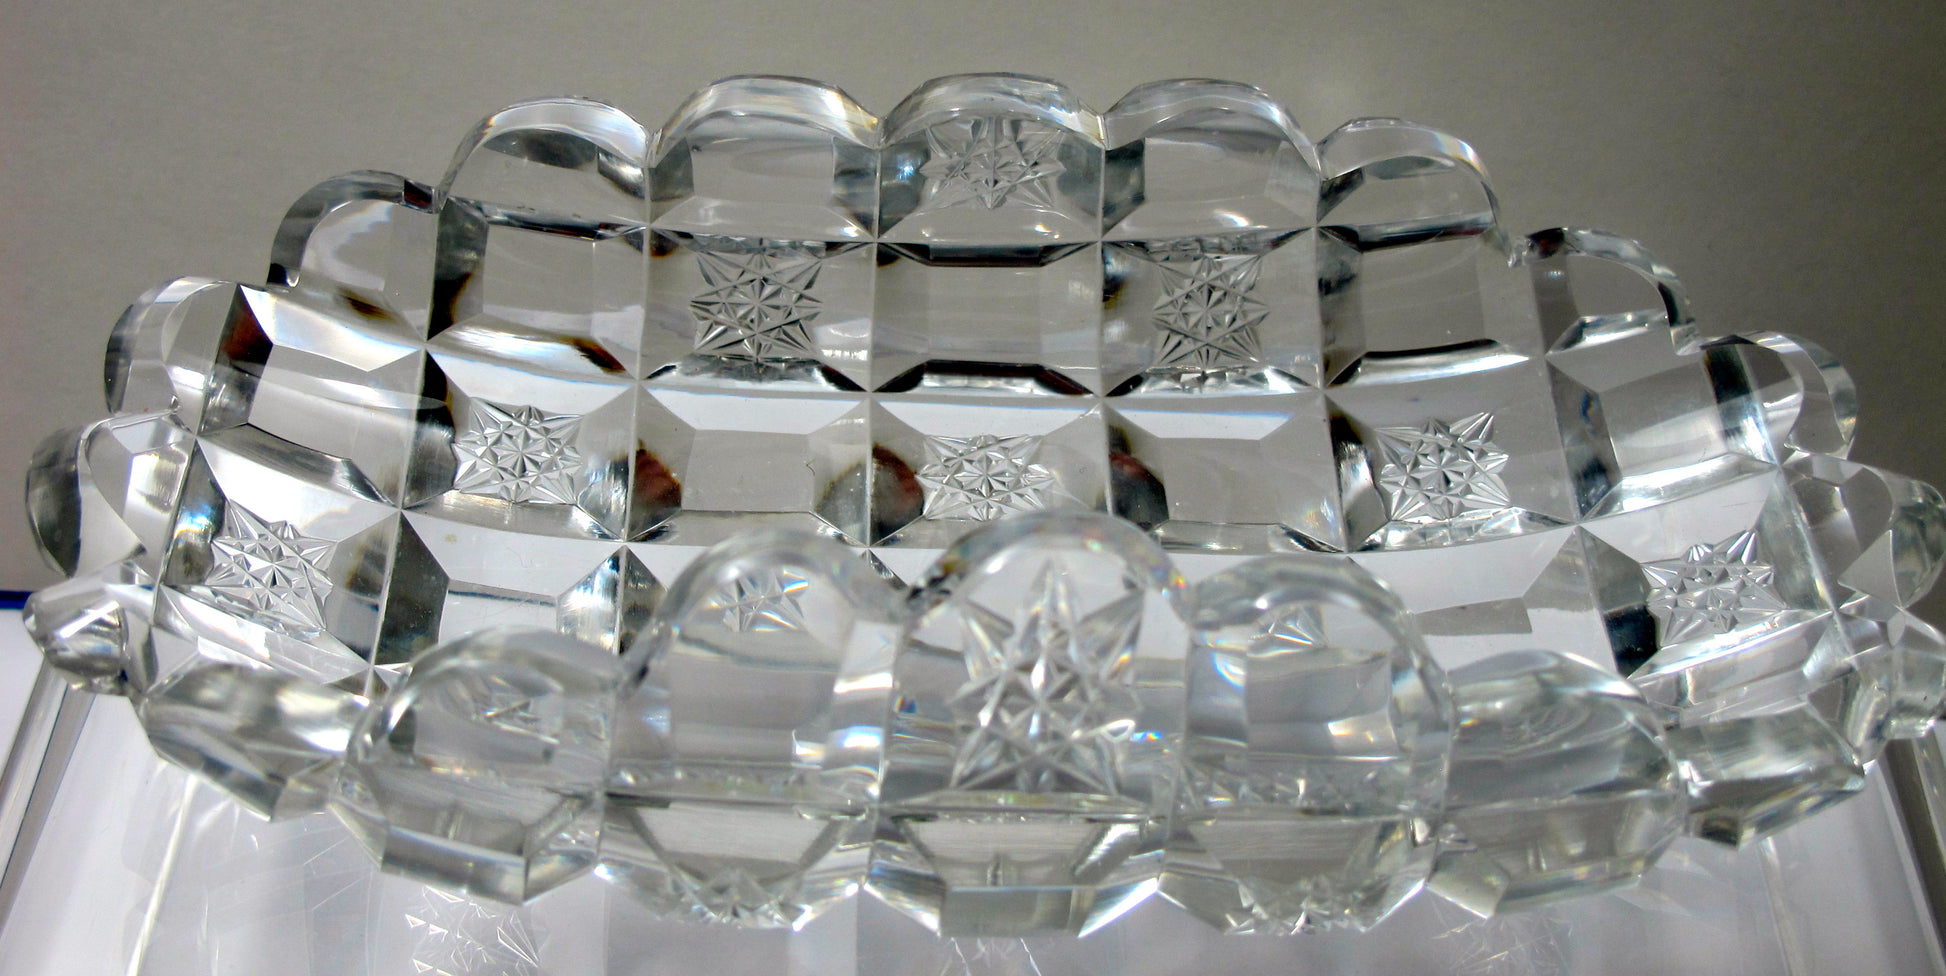 Hand Cut glass lay down spooner Antique ABP - O'Rourke crystal awards & gifts abp cut glass